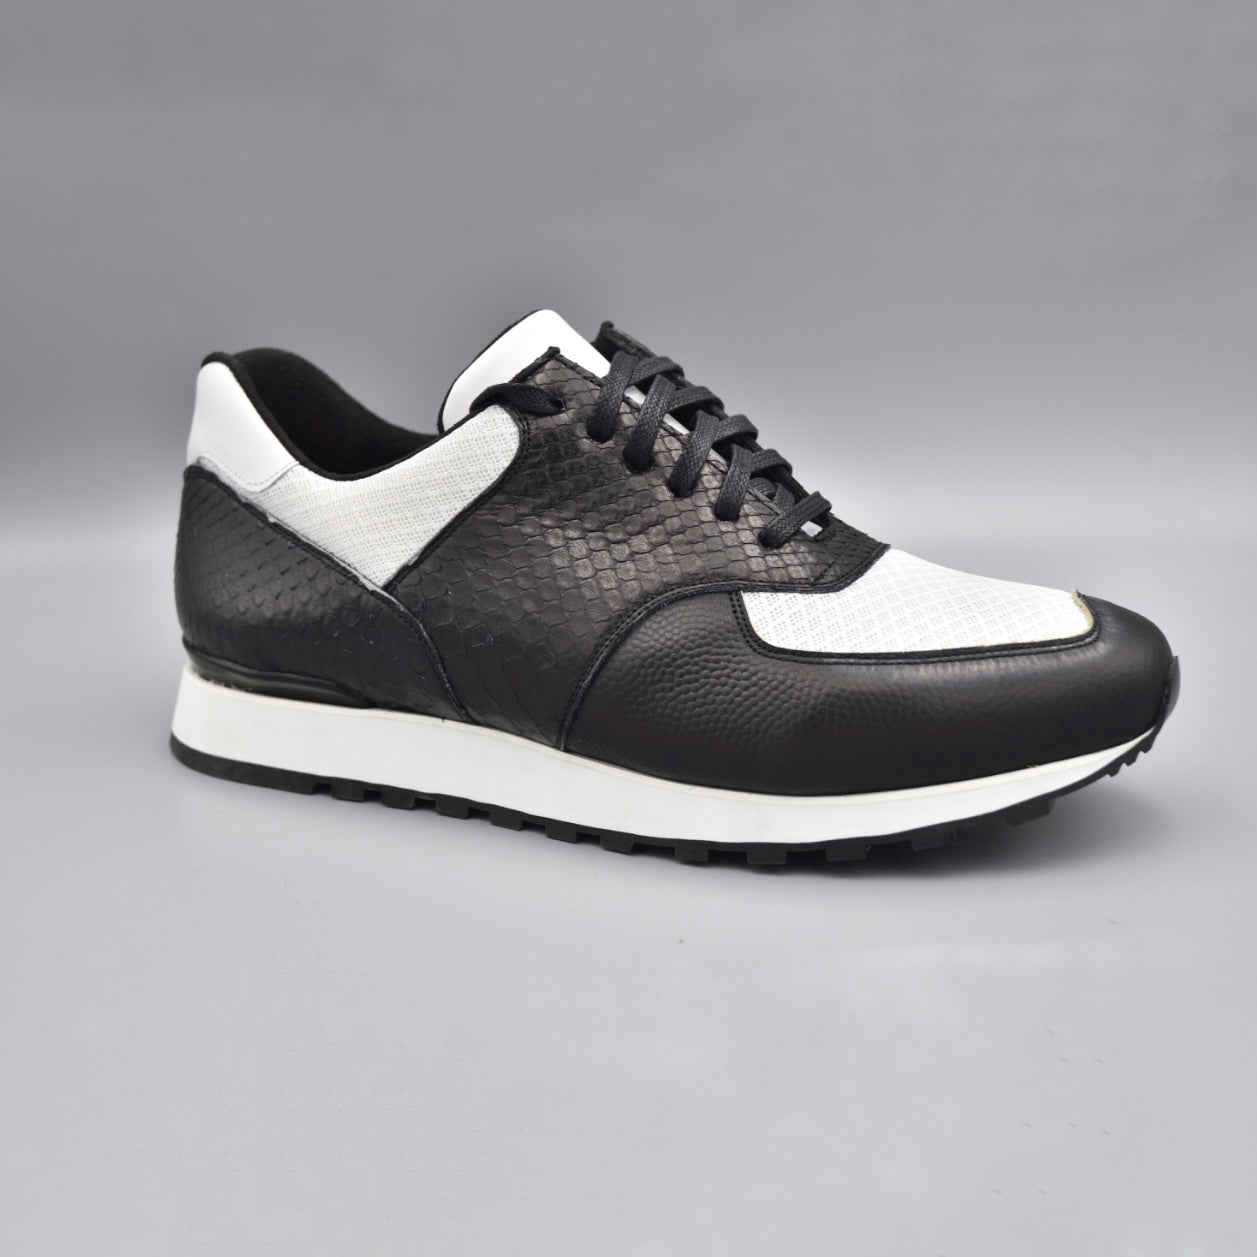 Bungee Brand - Sneakers and Sportswear by Darrell Alston – Bungee Oblečení